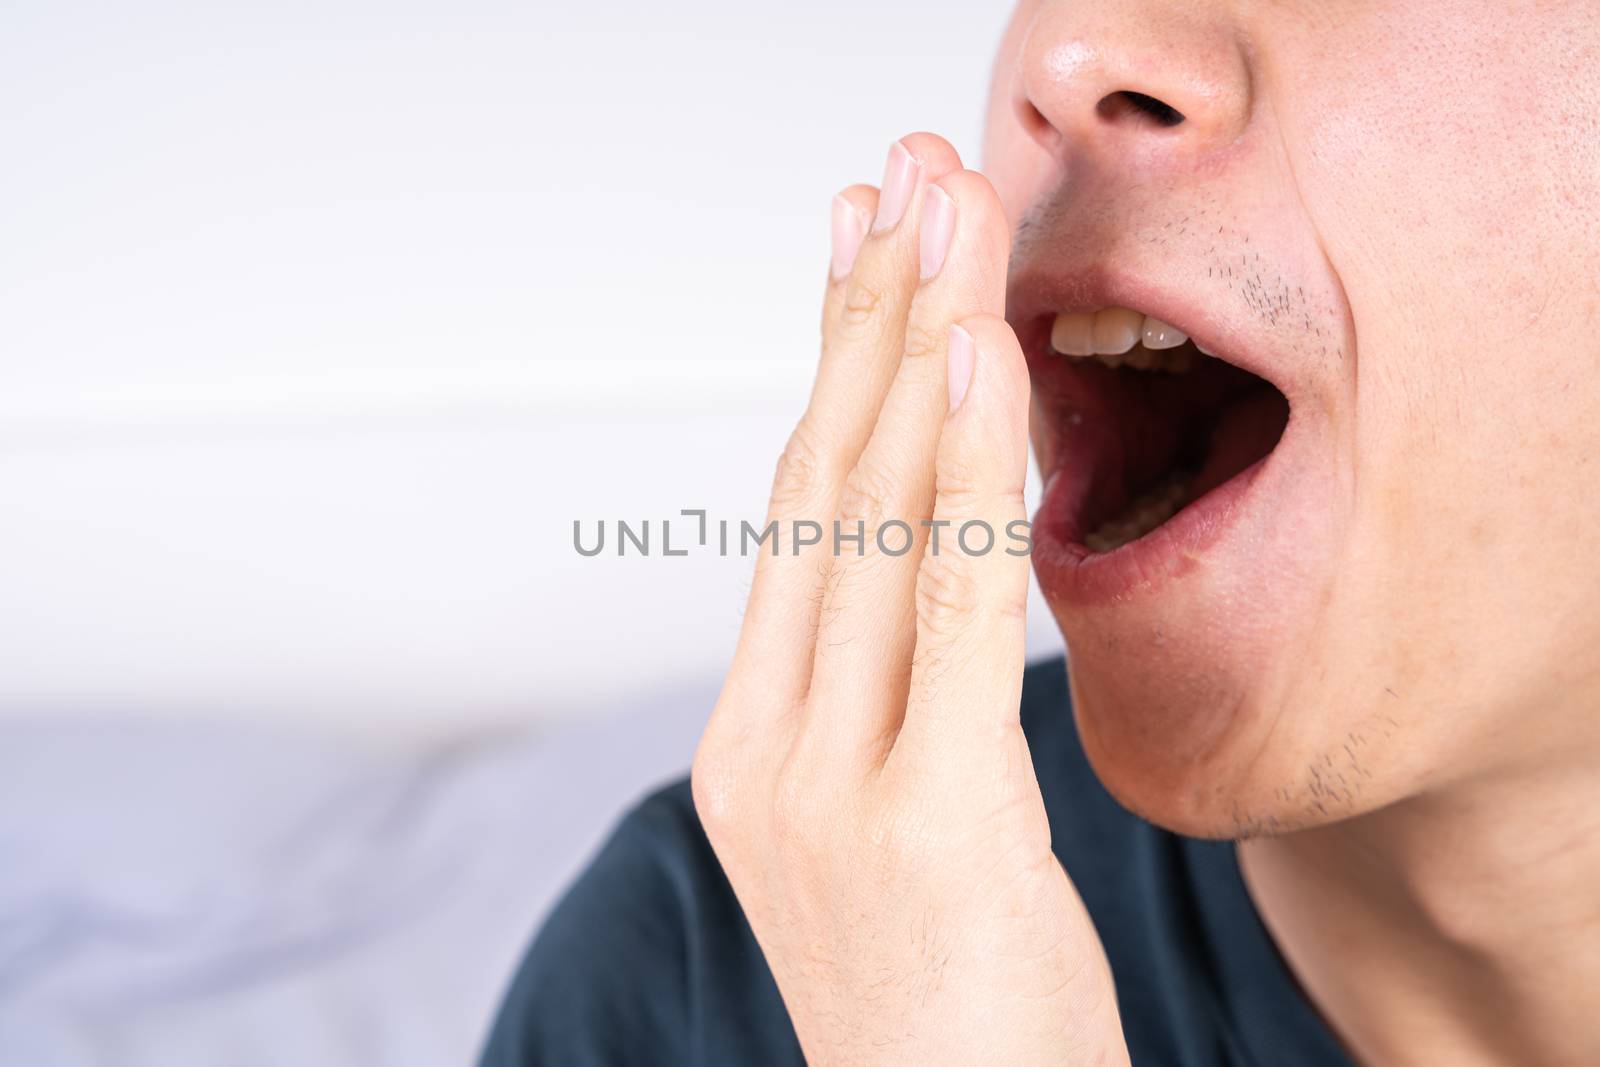 Asian man are yawning covering open mouth with hand after he wake up. Healthcare medical or daily life concept.